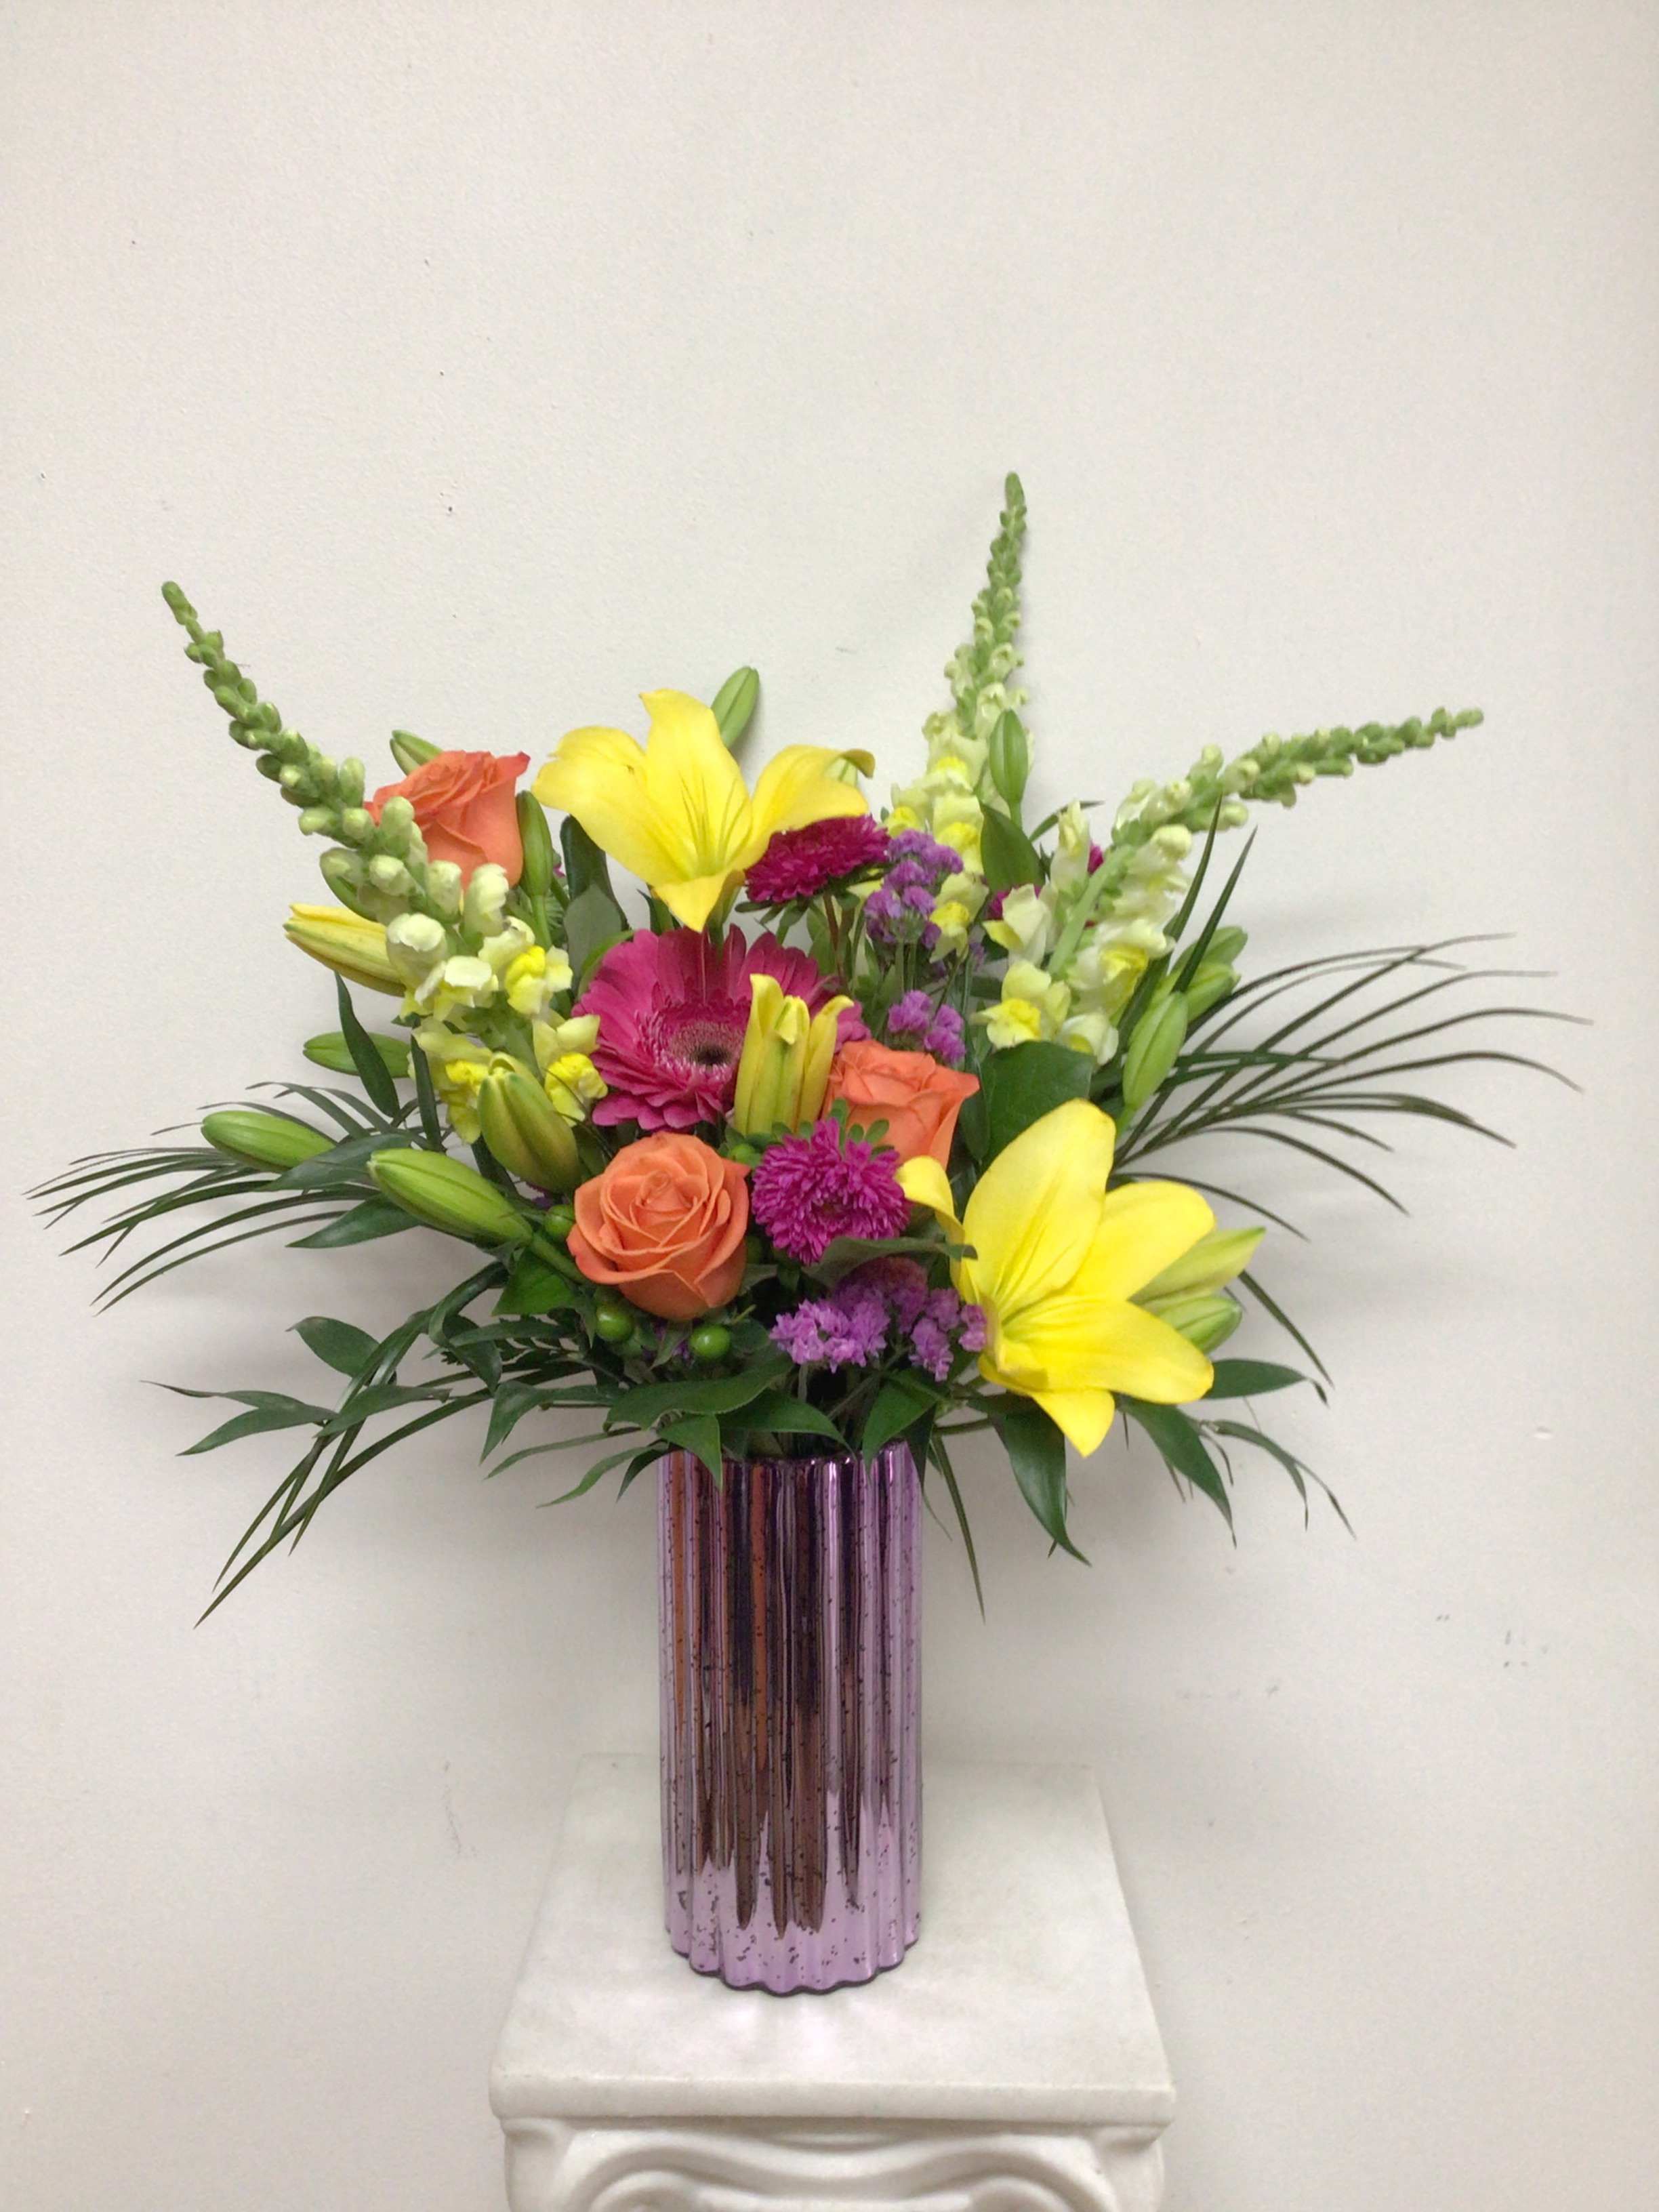 Color Blast - 8 inch lavender ribbed Mercury glass vase is arranged with yellow lilies, hot pink gerbera daisies, orange roses, statice and mixed greenery. Approximate size is 20 inches tall by 15 inches wide